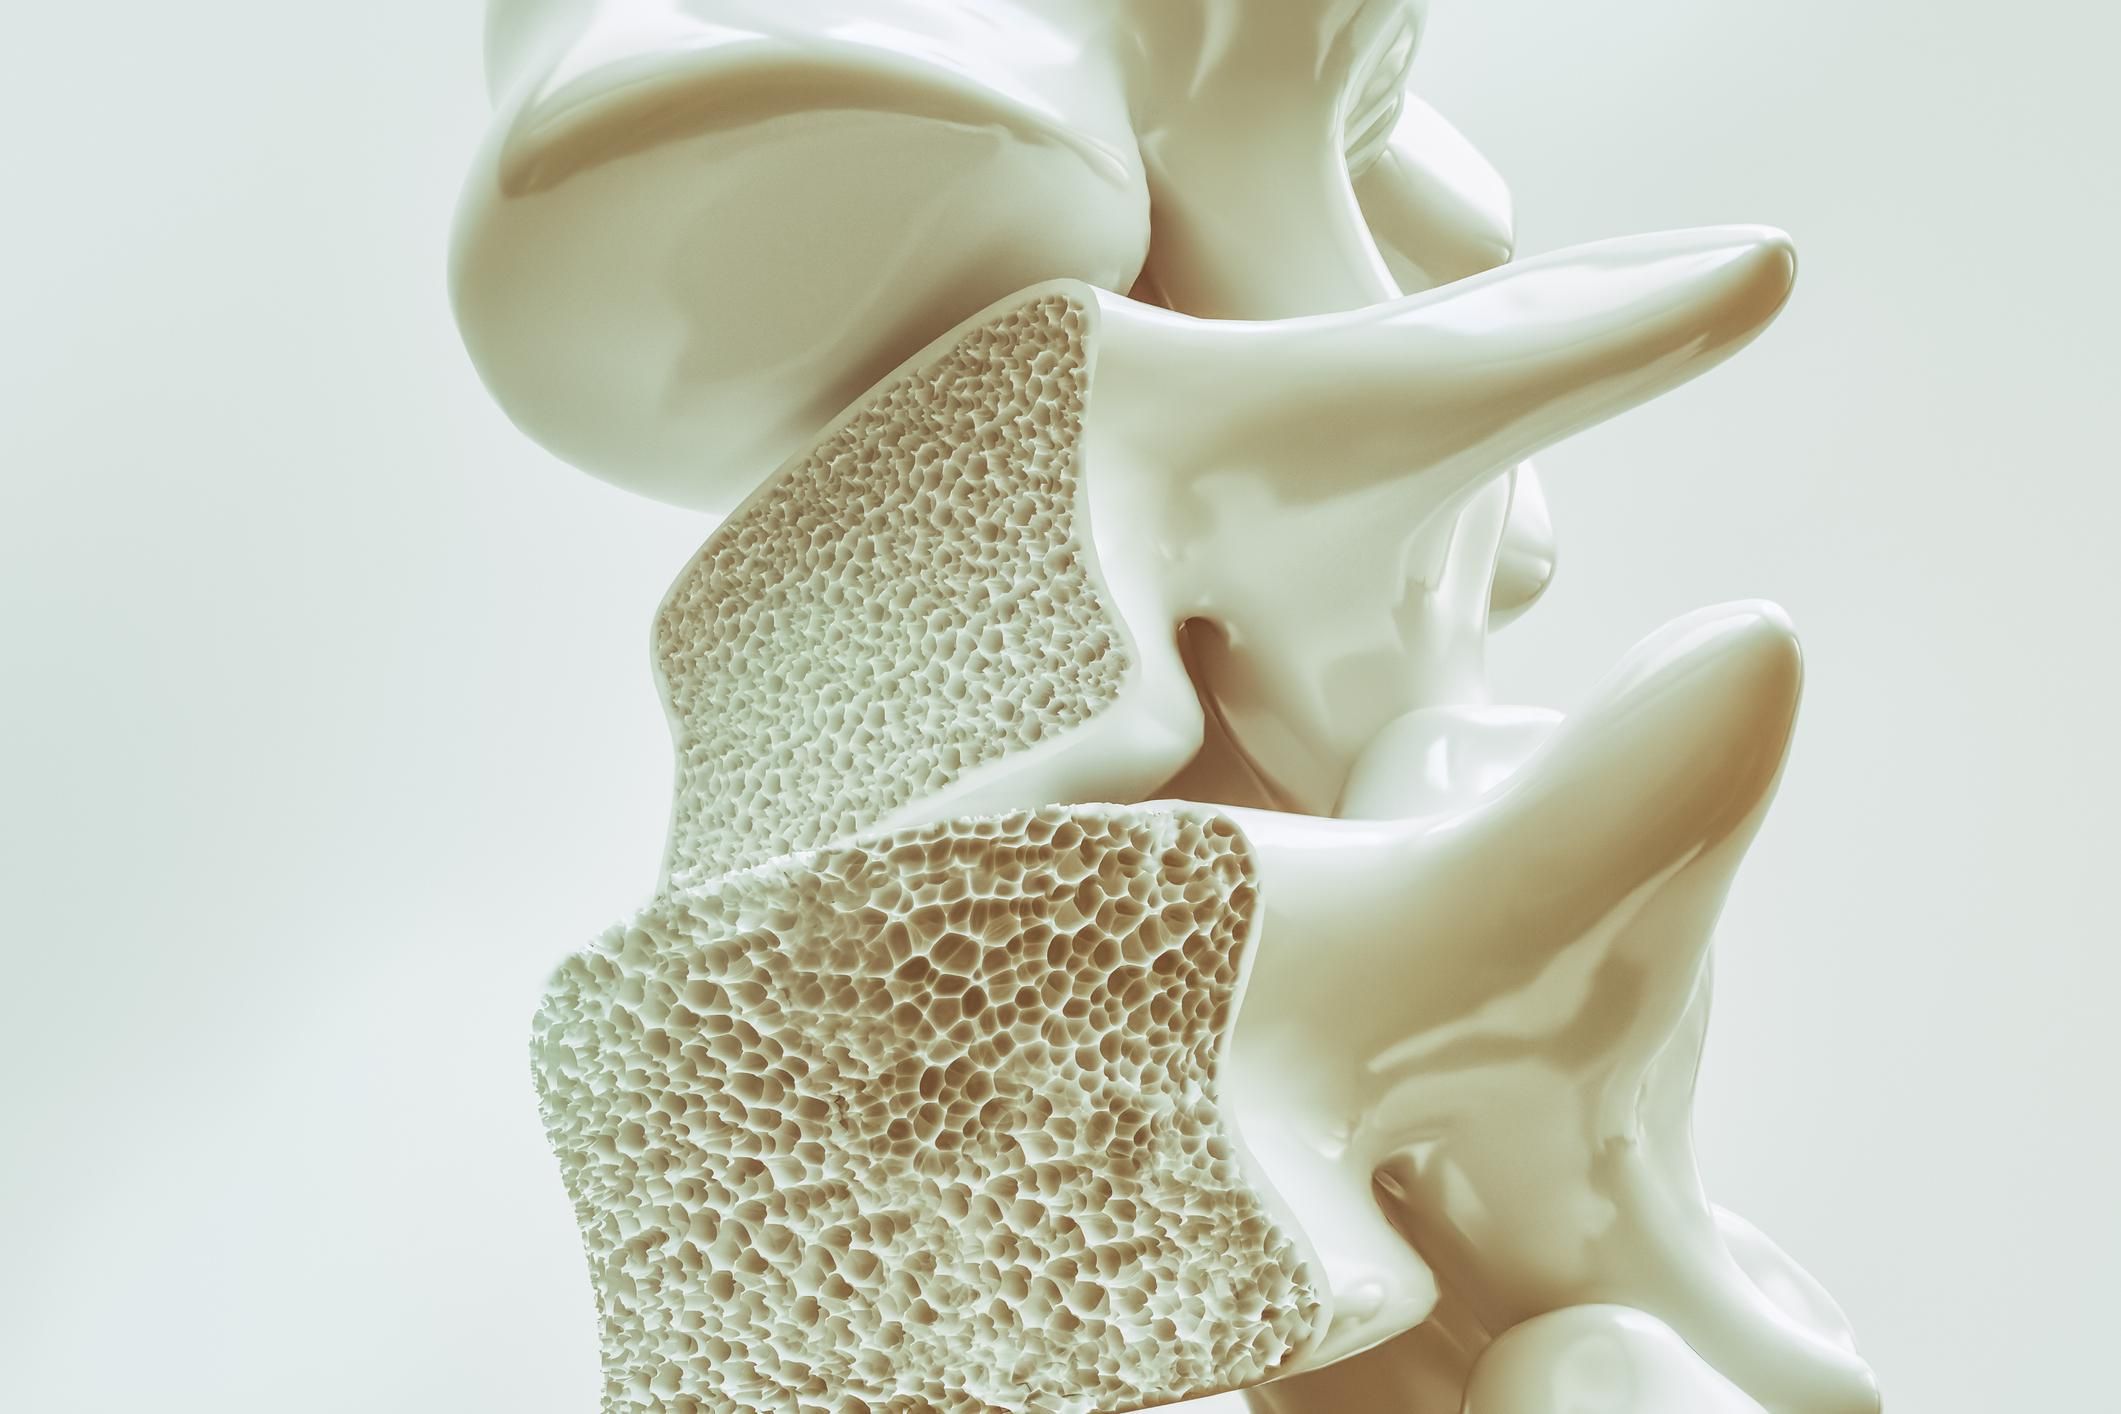 Osteoporosis on the spine 